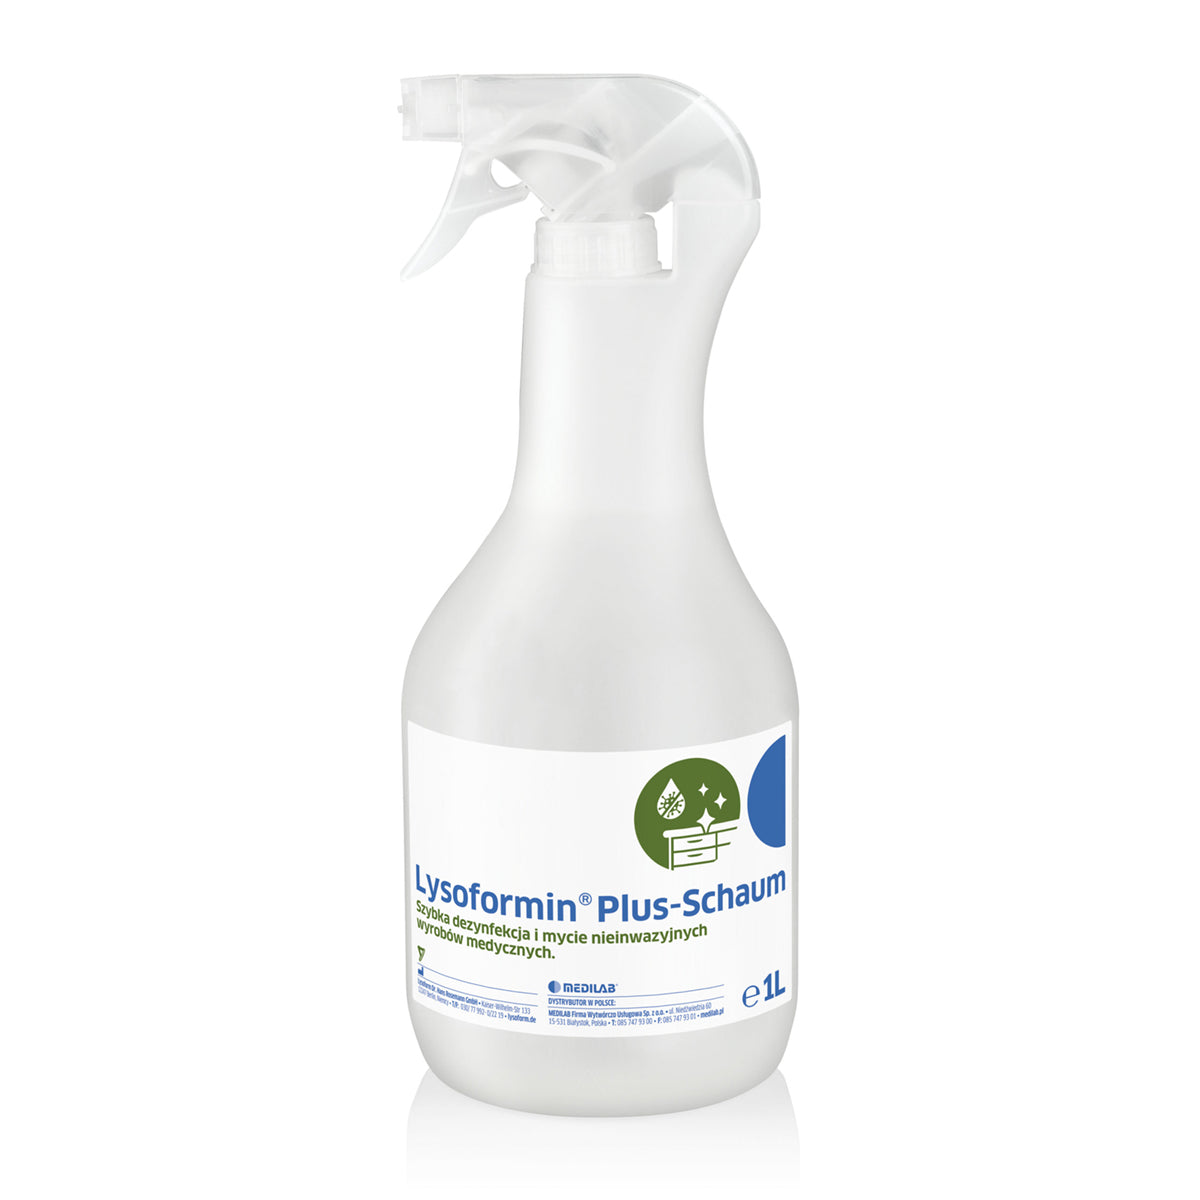 Disinfectant and cleaning foam lysoformin plus foam 1l